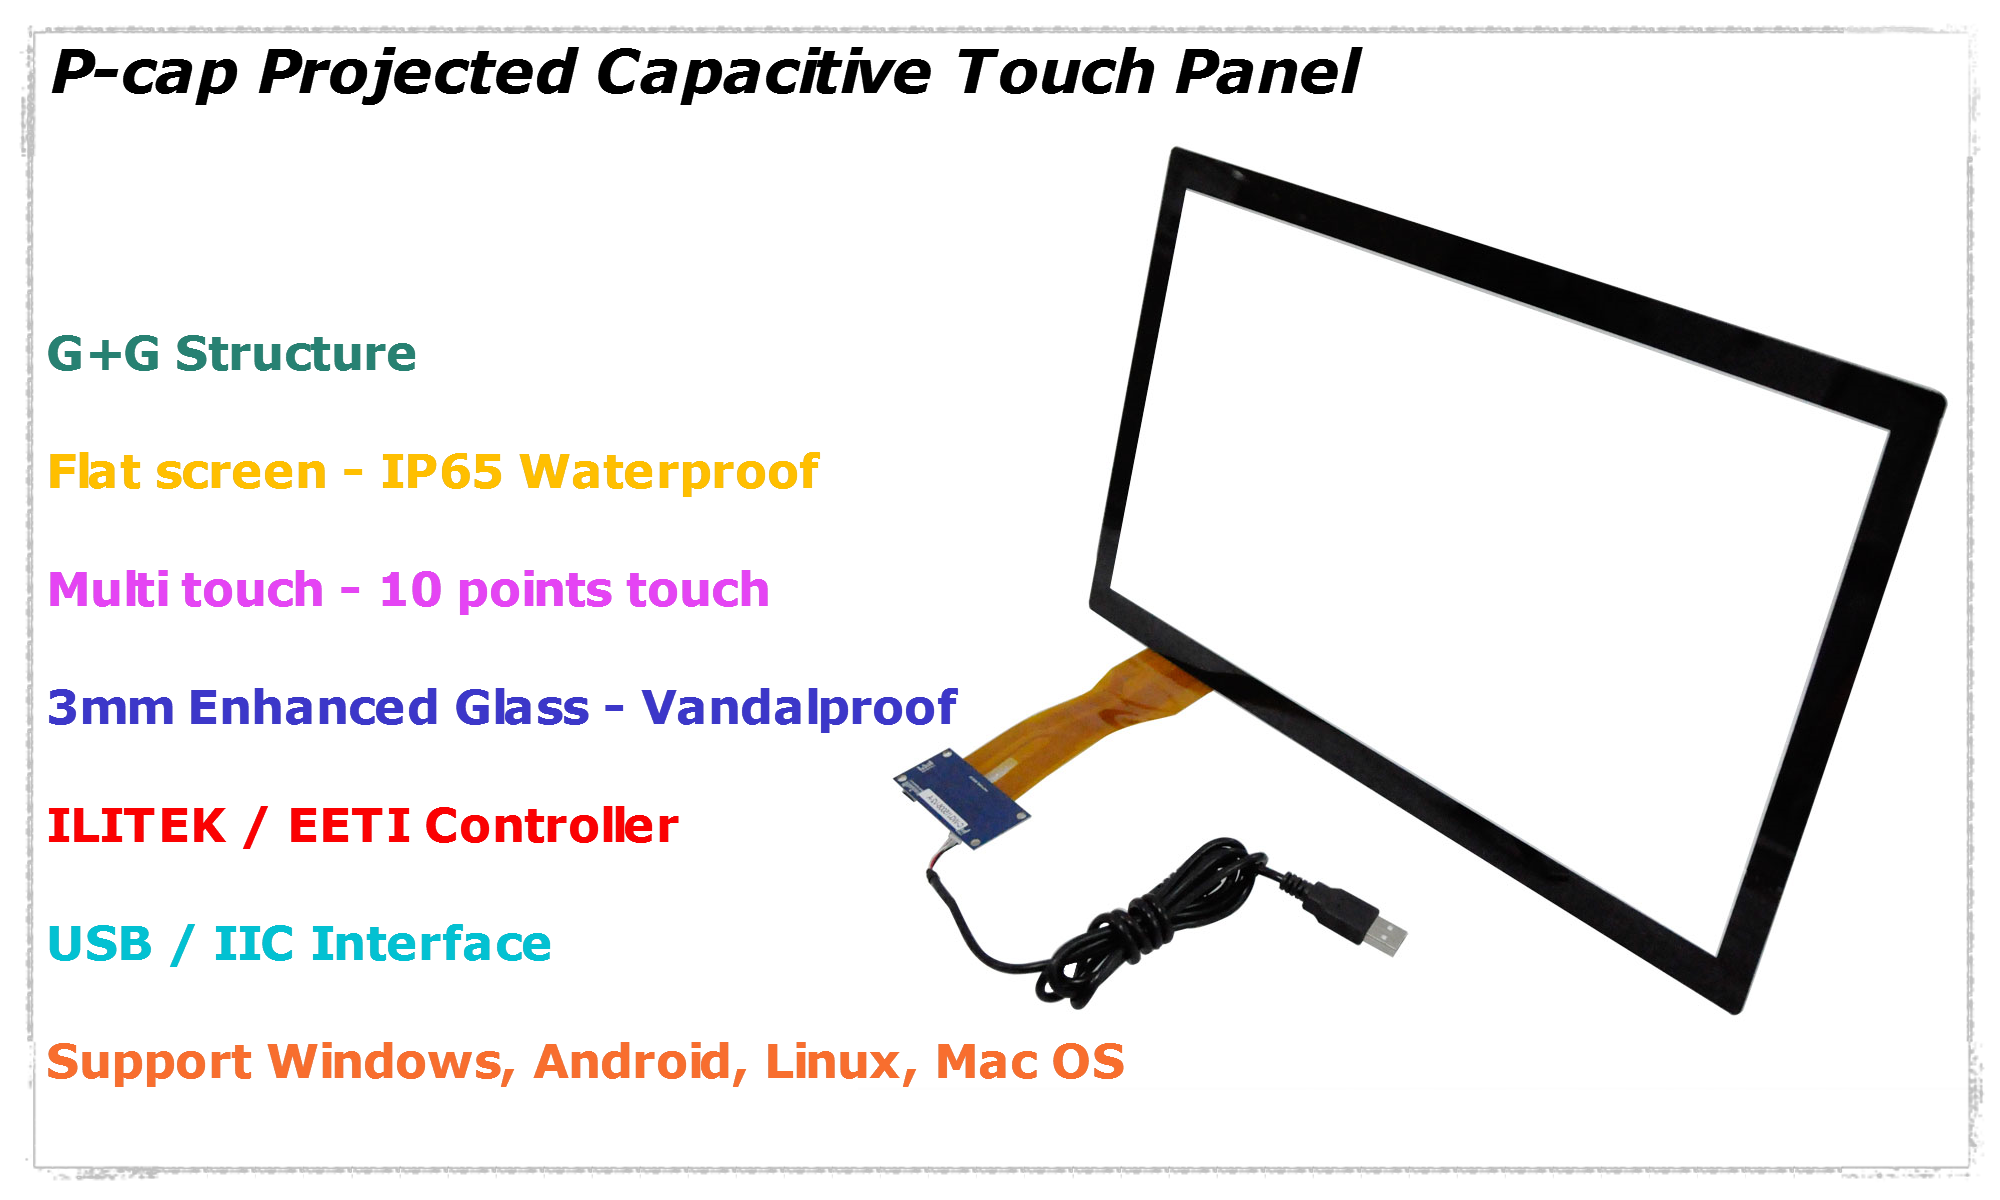 https://www.cjtouch.com/lcd-display-panels-22inch-muti-touch-pcap-touch-panel-tft-display-800480-transmissive-400cd-brightness-rgb-interface-product/